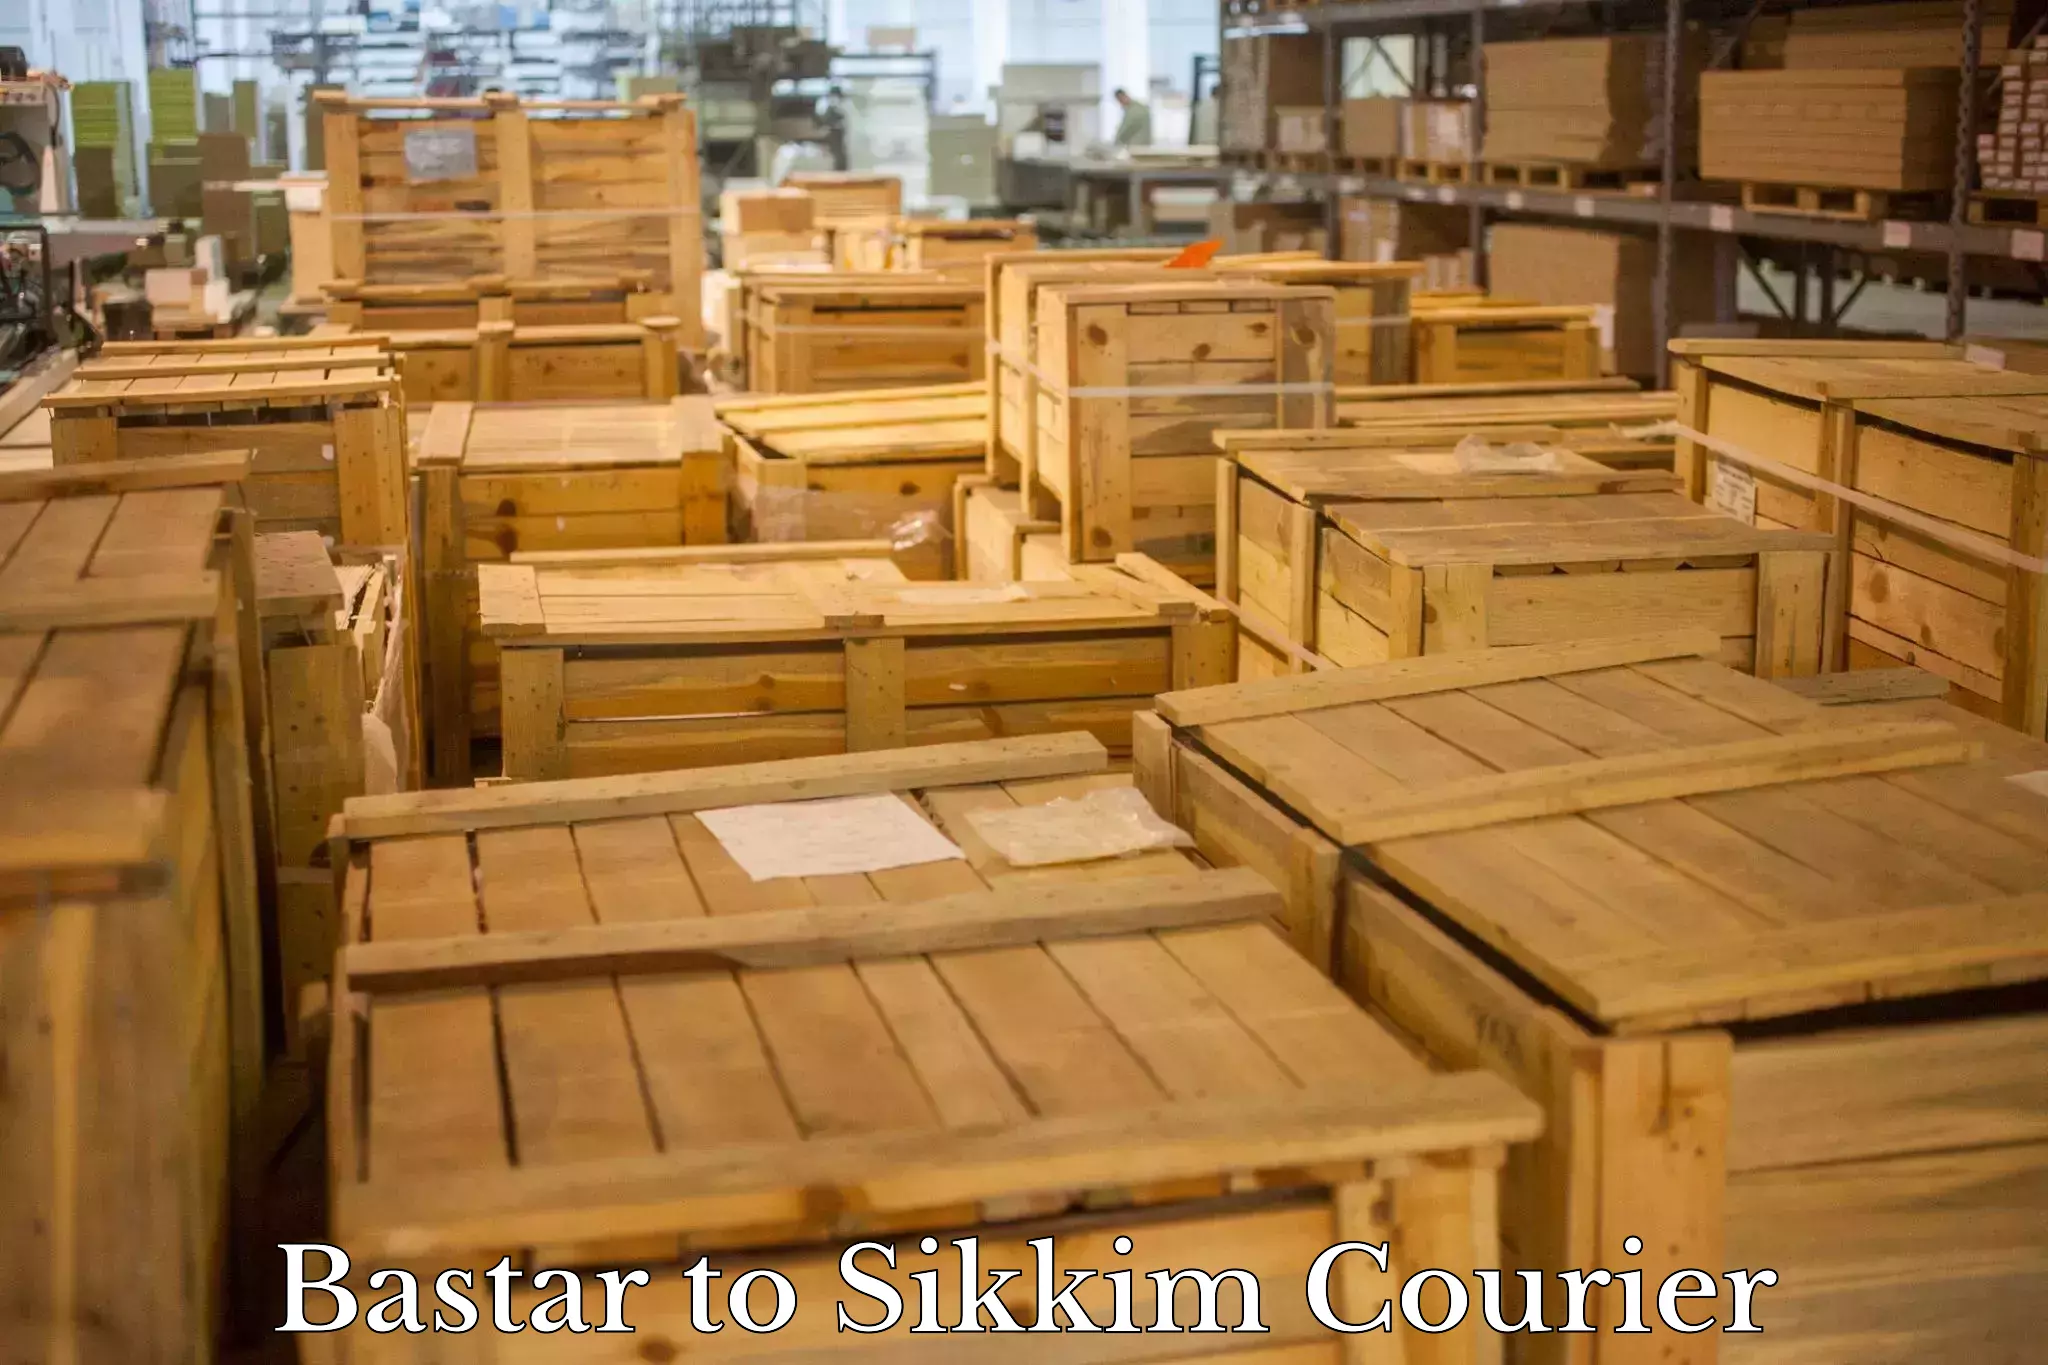 Next-day delivery options Bastar to Sikkim